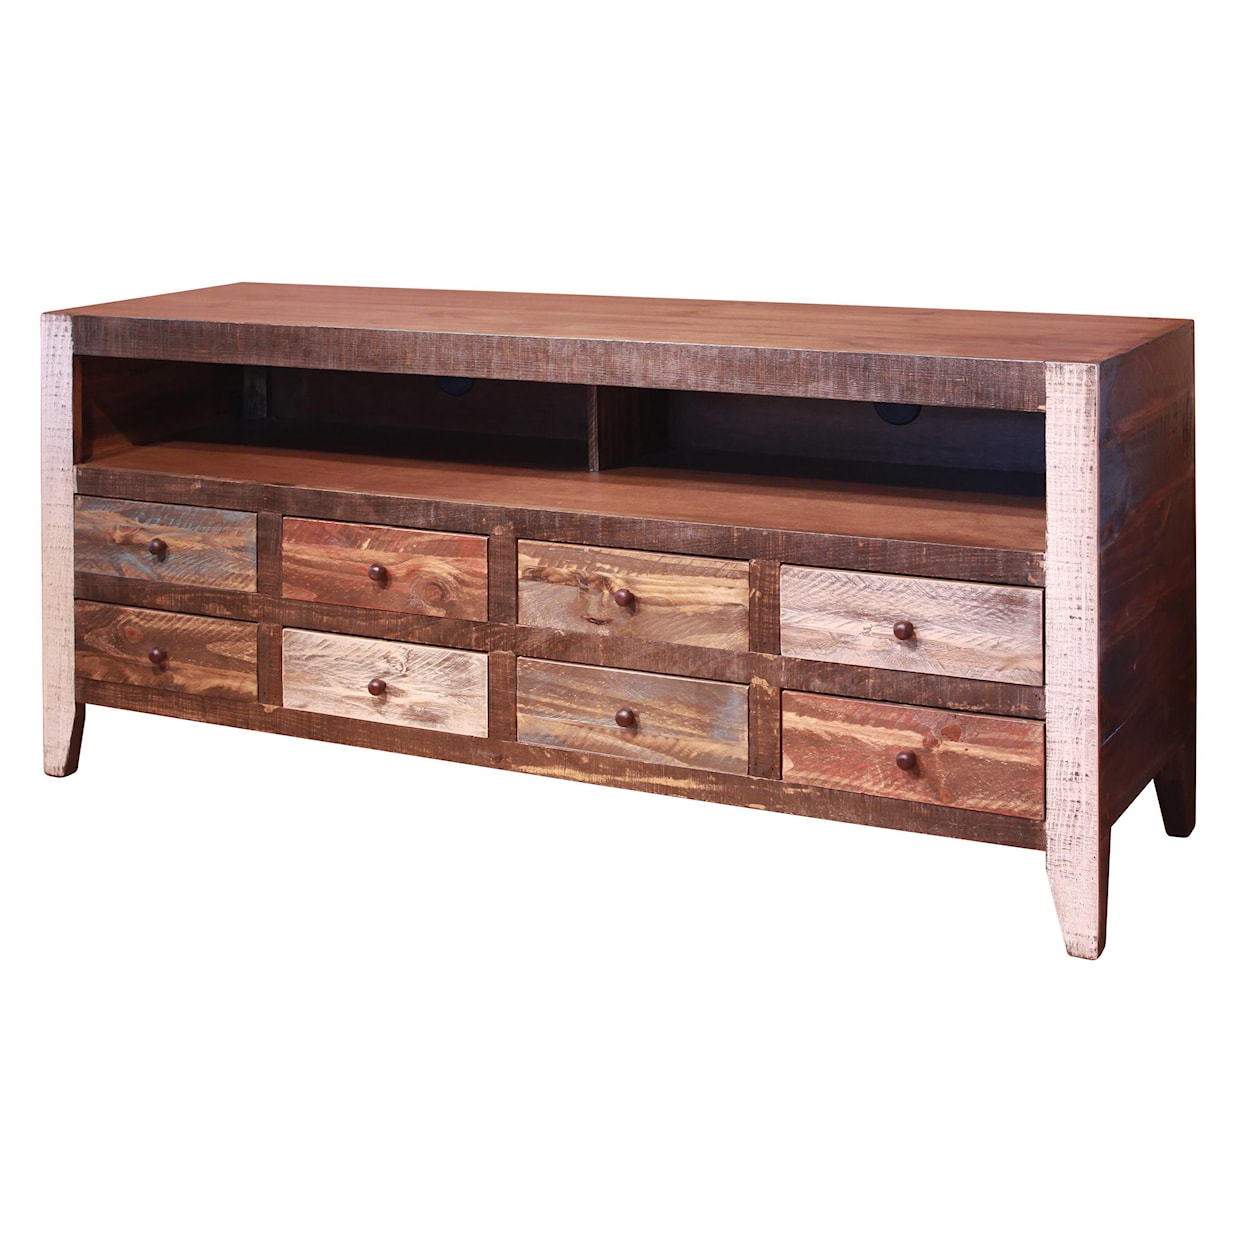 IFD 900 Antique 8 Drawer TV Stand